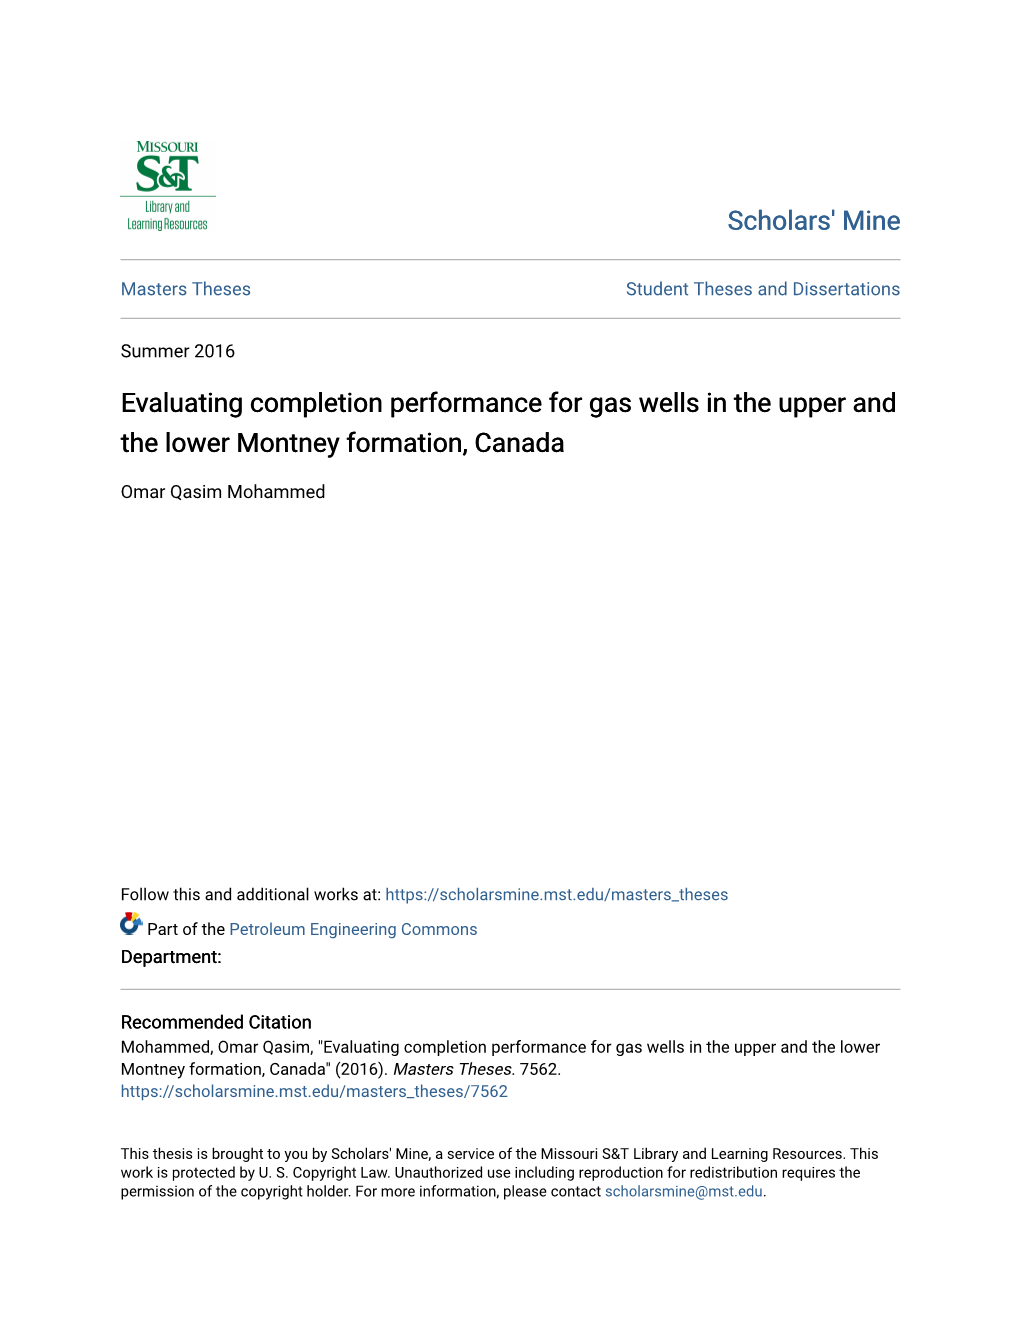 Evaluating Completion Performance for Gas Wells in the Upper and the Lower Montney Formation, Canada